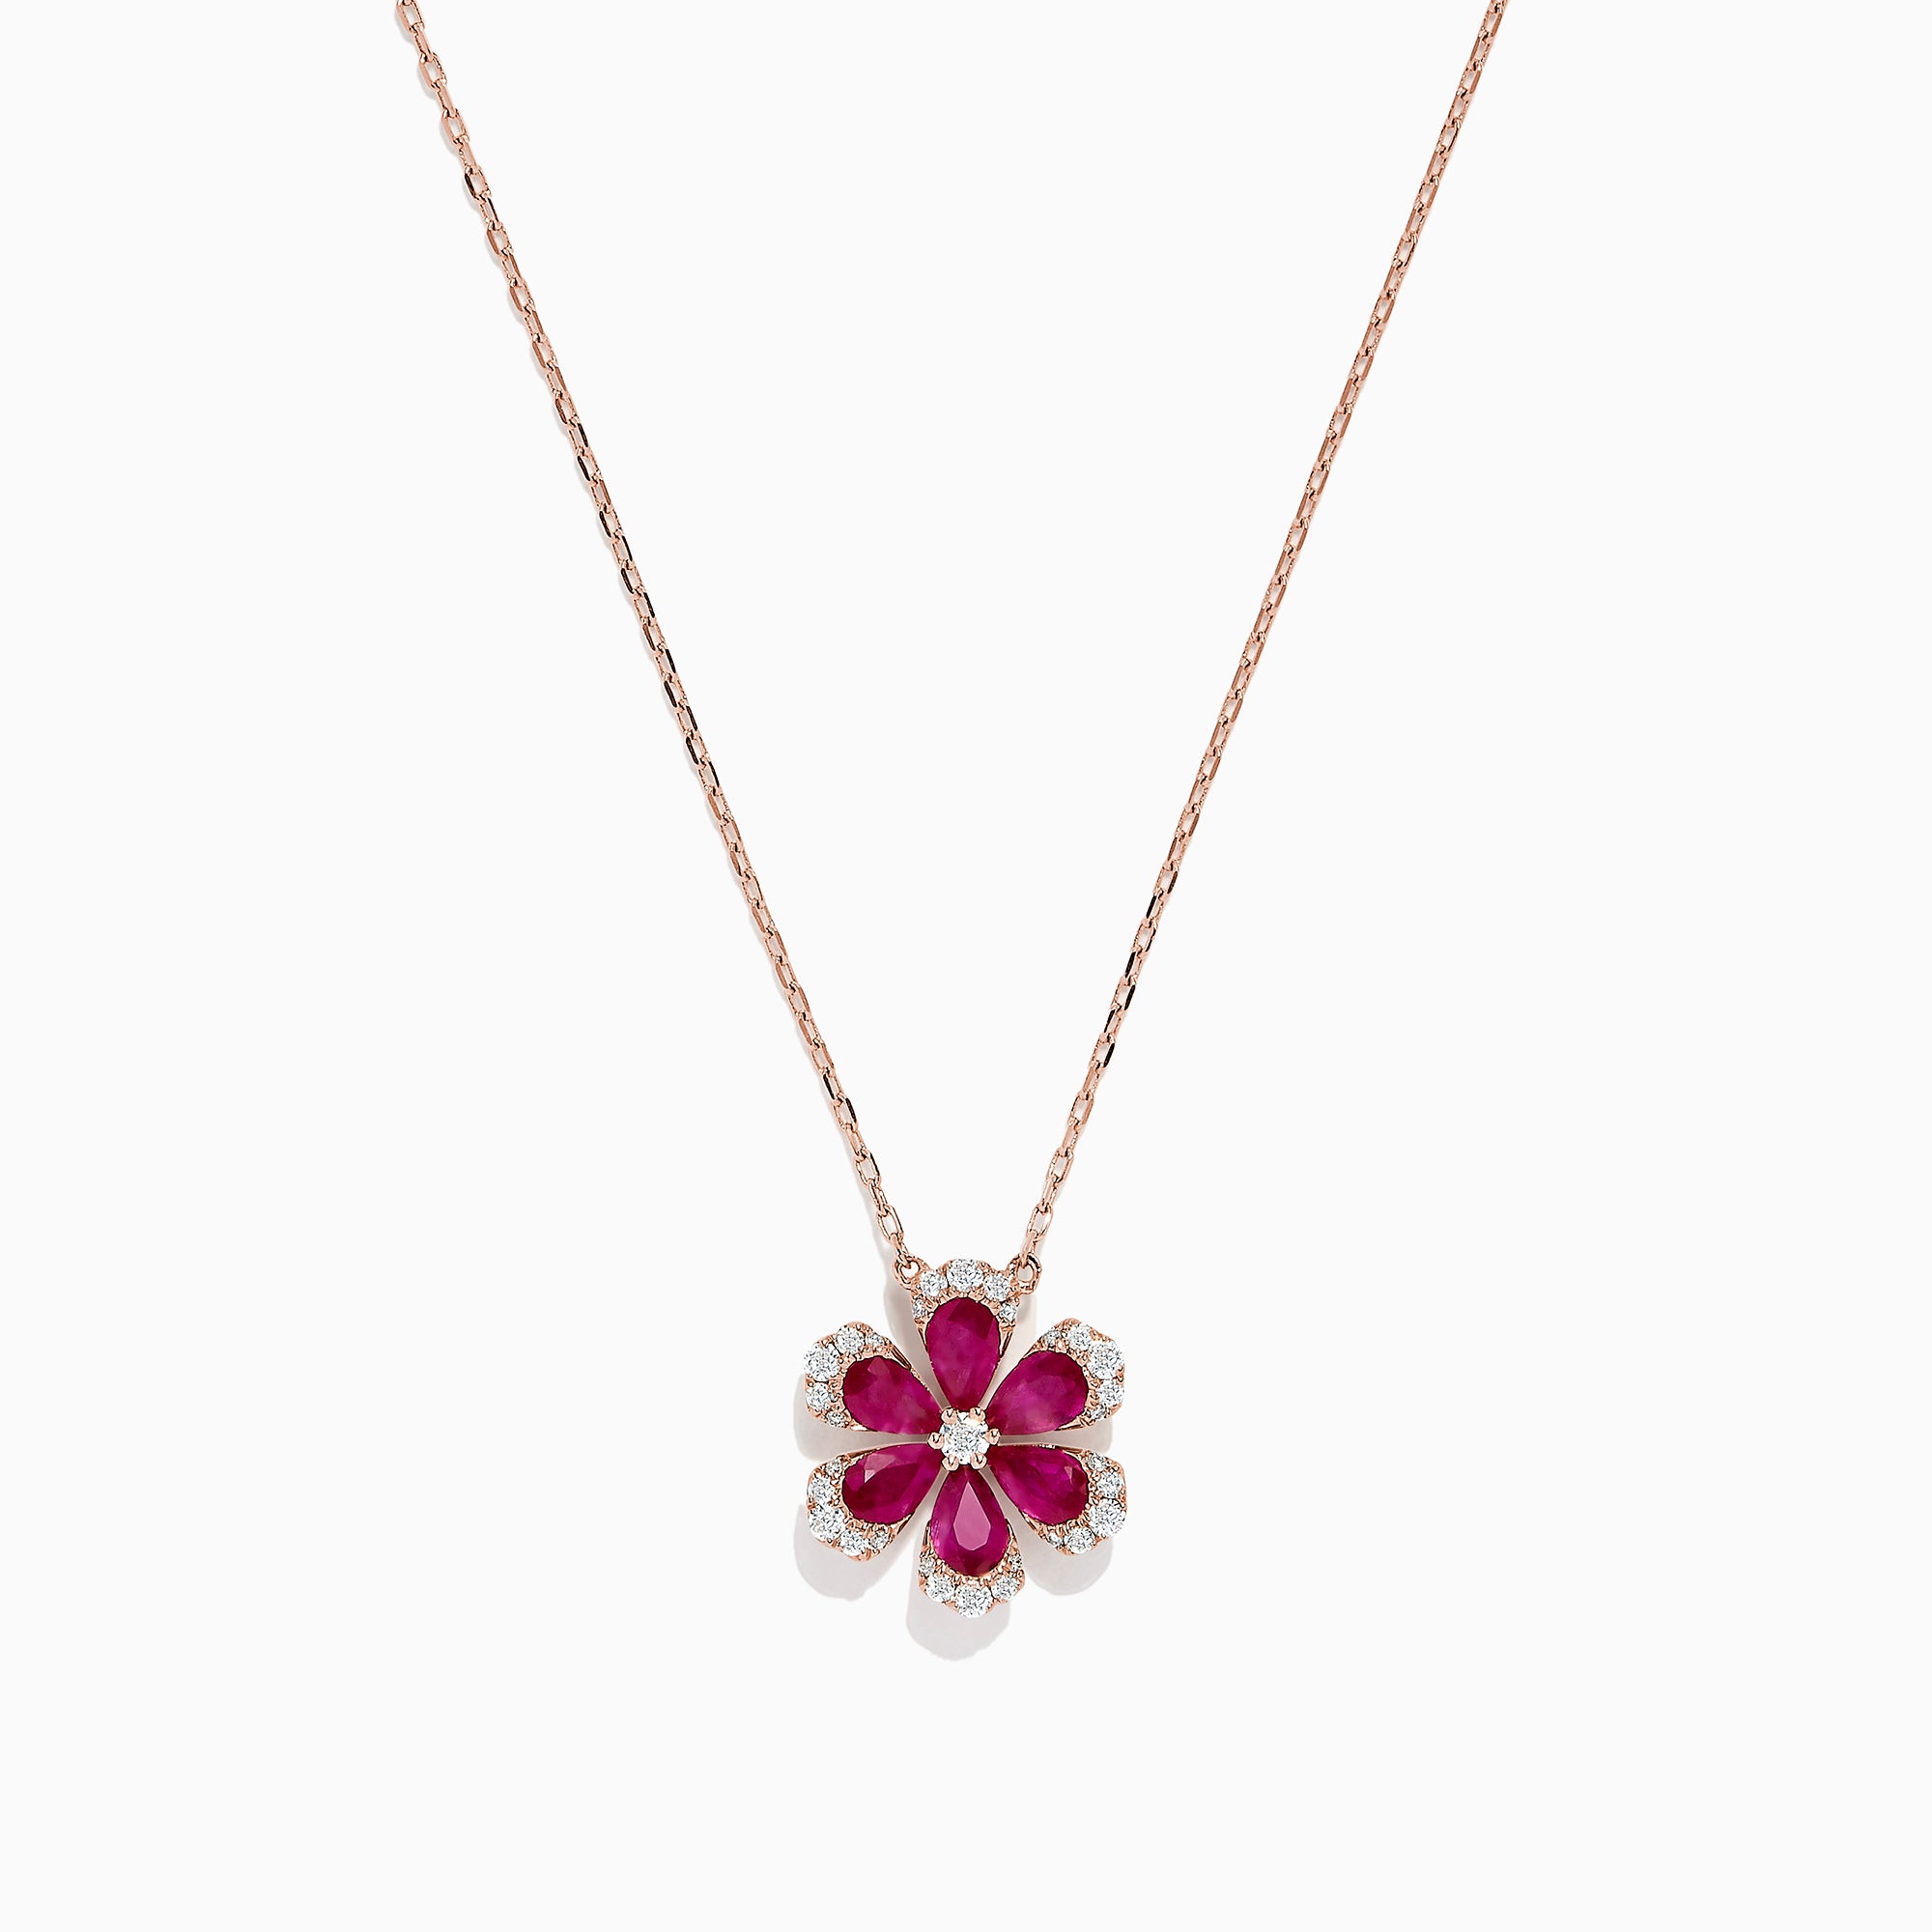 Effy Nature 14K Rose Gold Ruby and Diamond Flower Necklace, 1.91 TCW